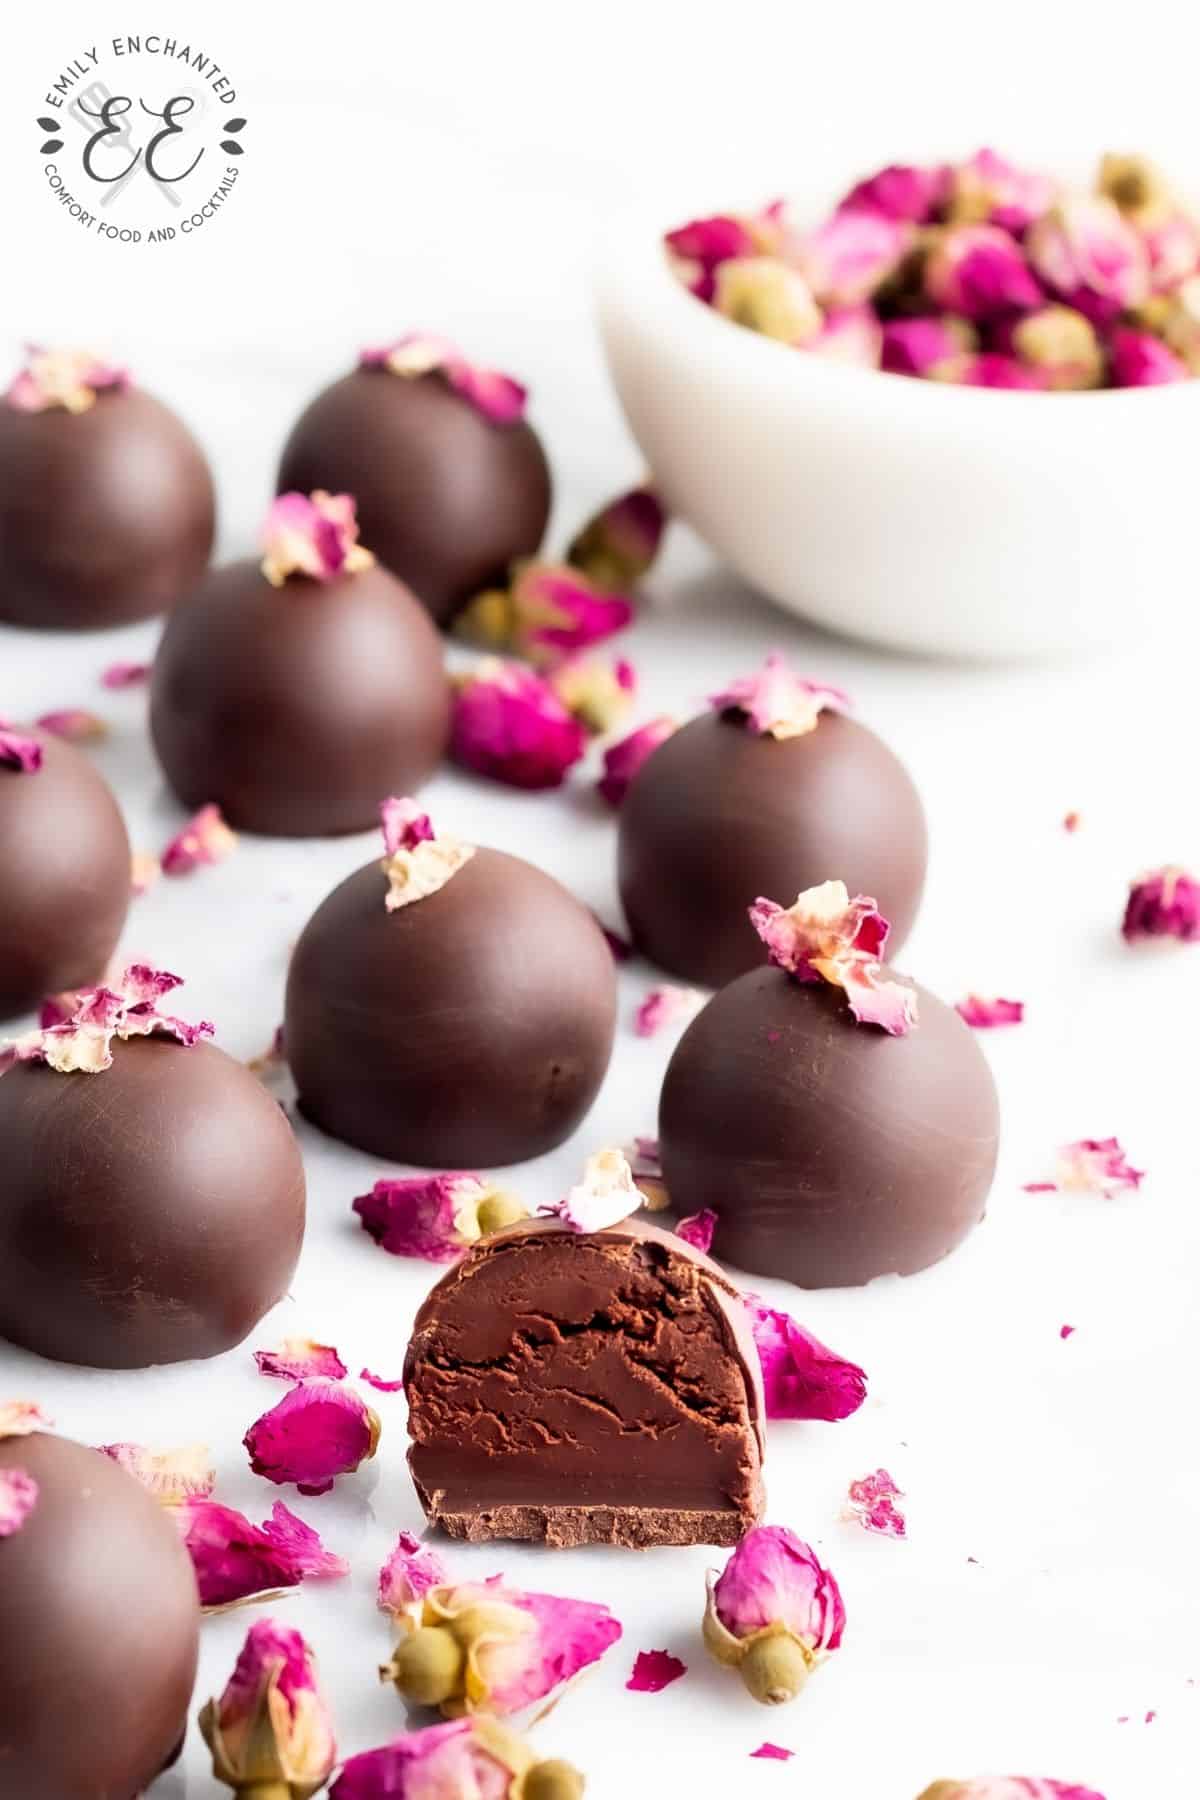 Chocolate Truffles with Roses